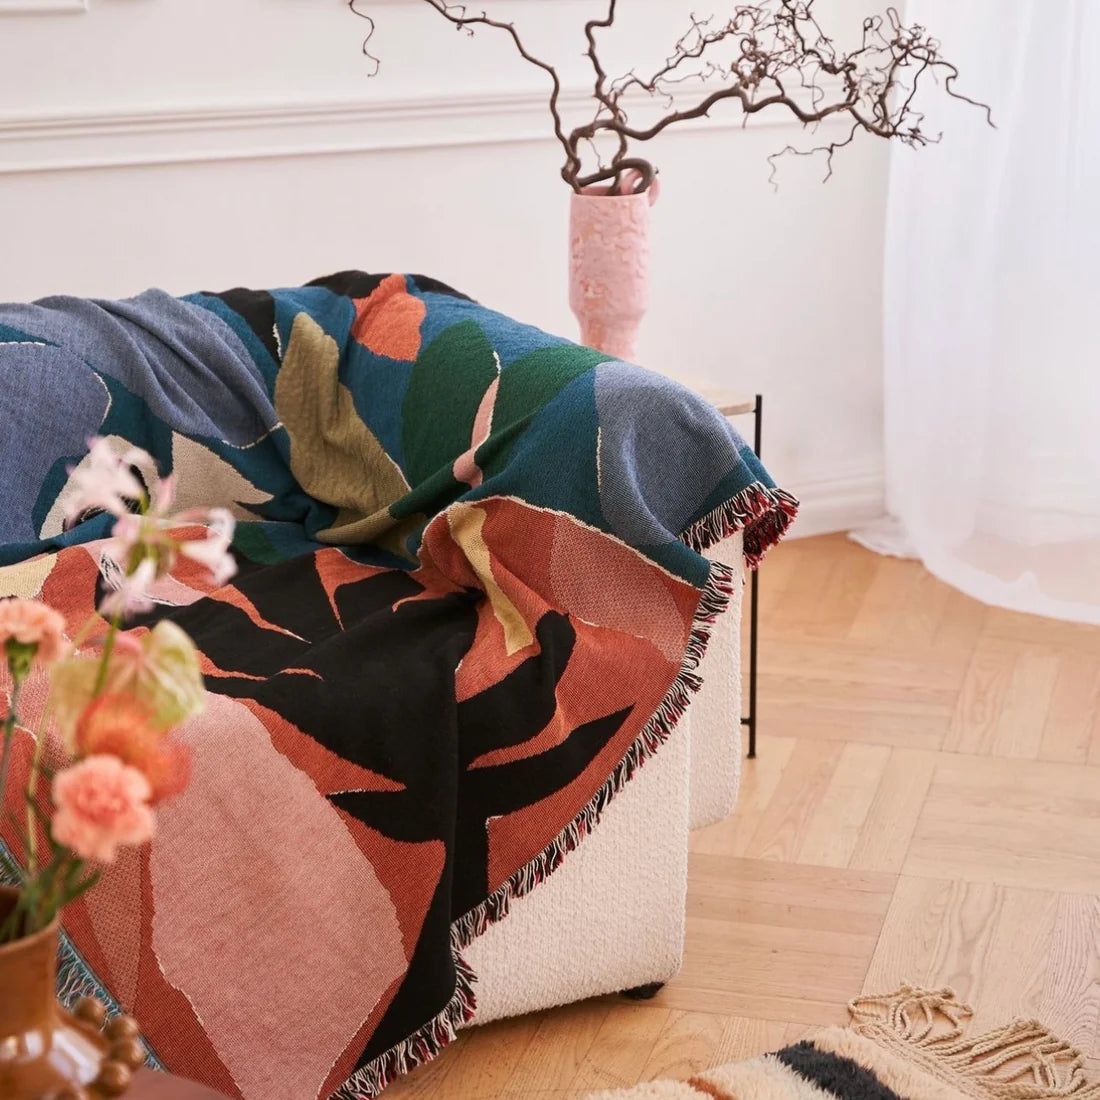 Colourful illustrated throw blanket in orange, greens and black draped over a sofa arm with a vase containing branches behind it